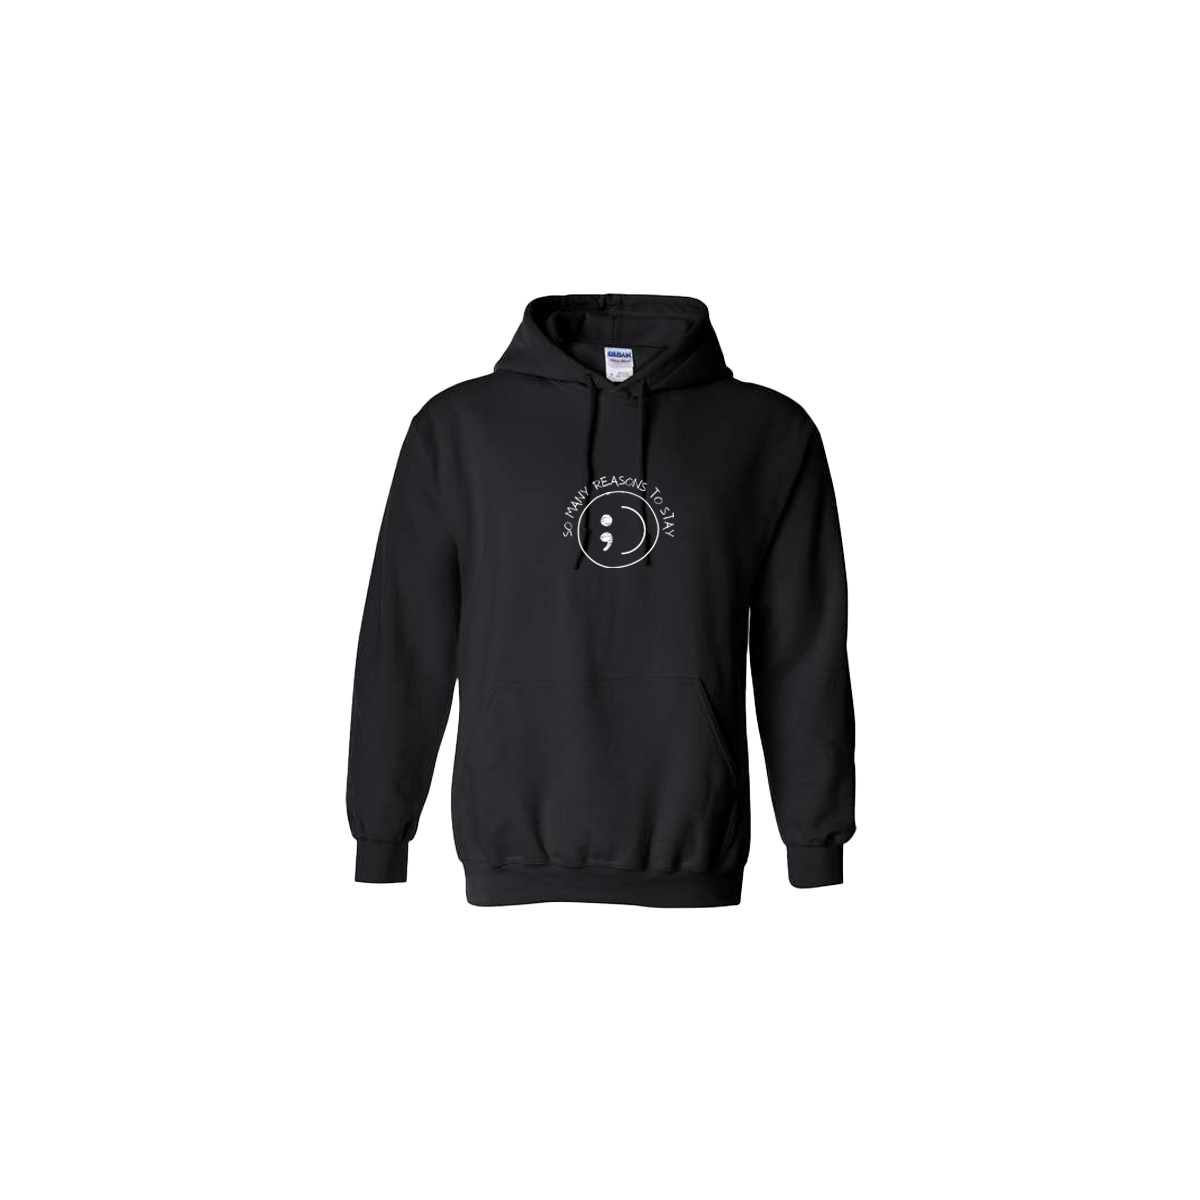 So Many Reasons to Stay Embroidered Black Hoodie - Mental Health Awareness Clothing